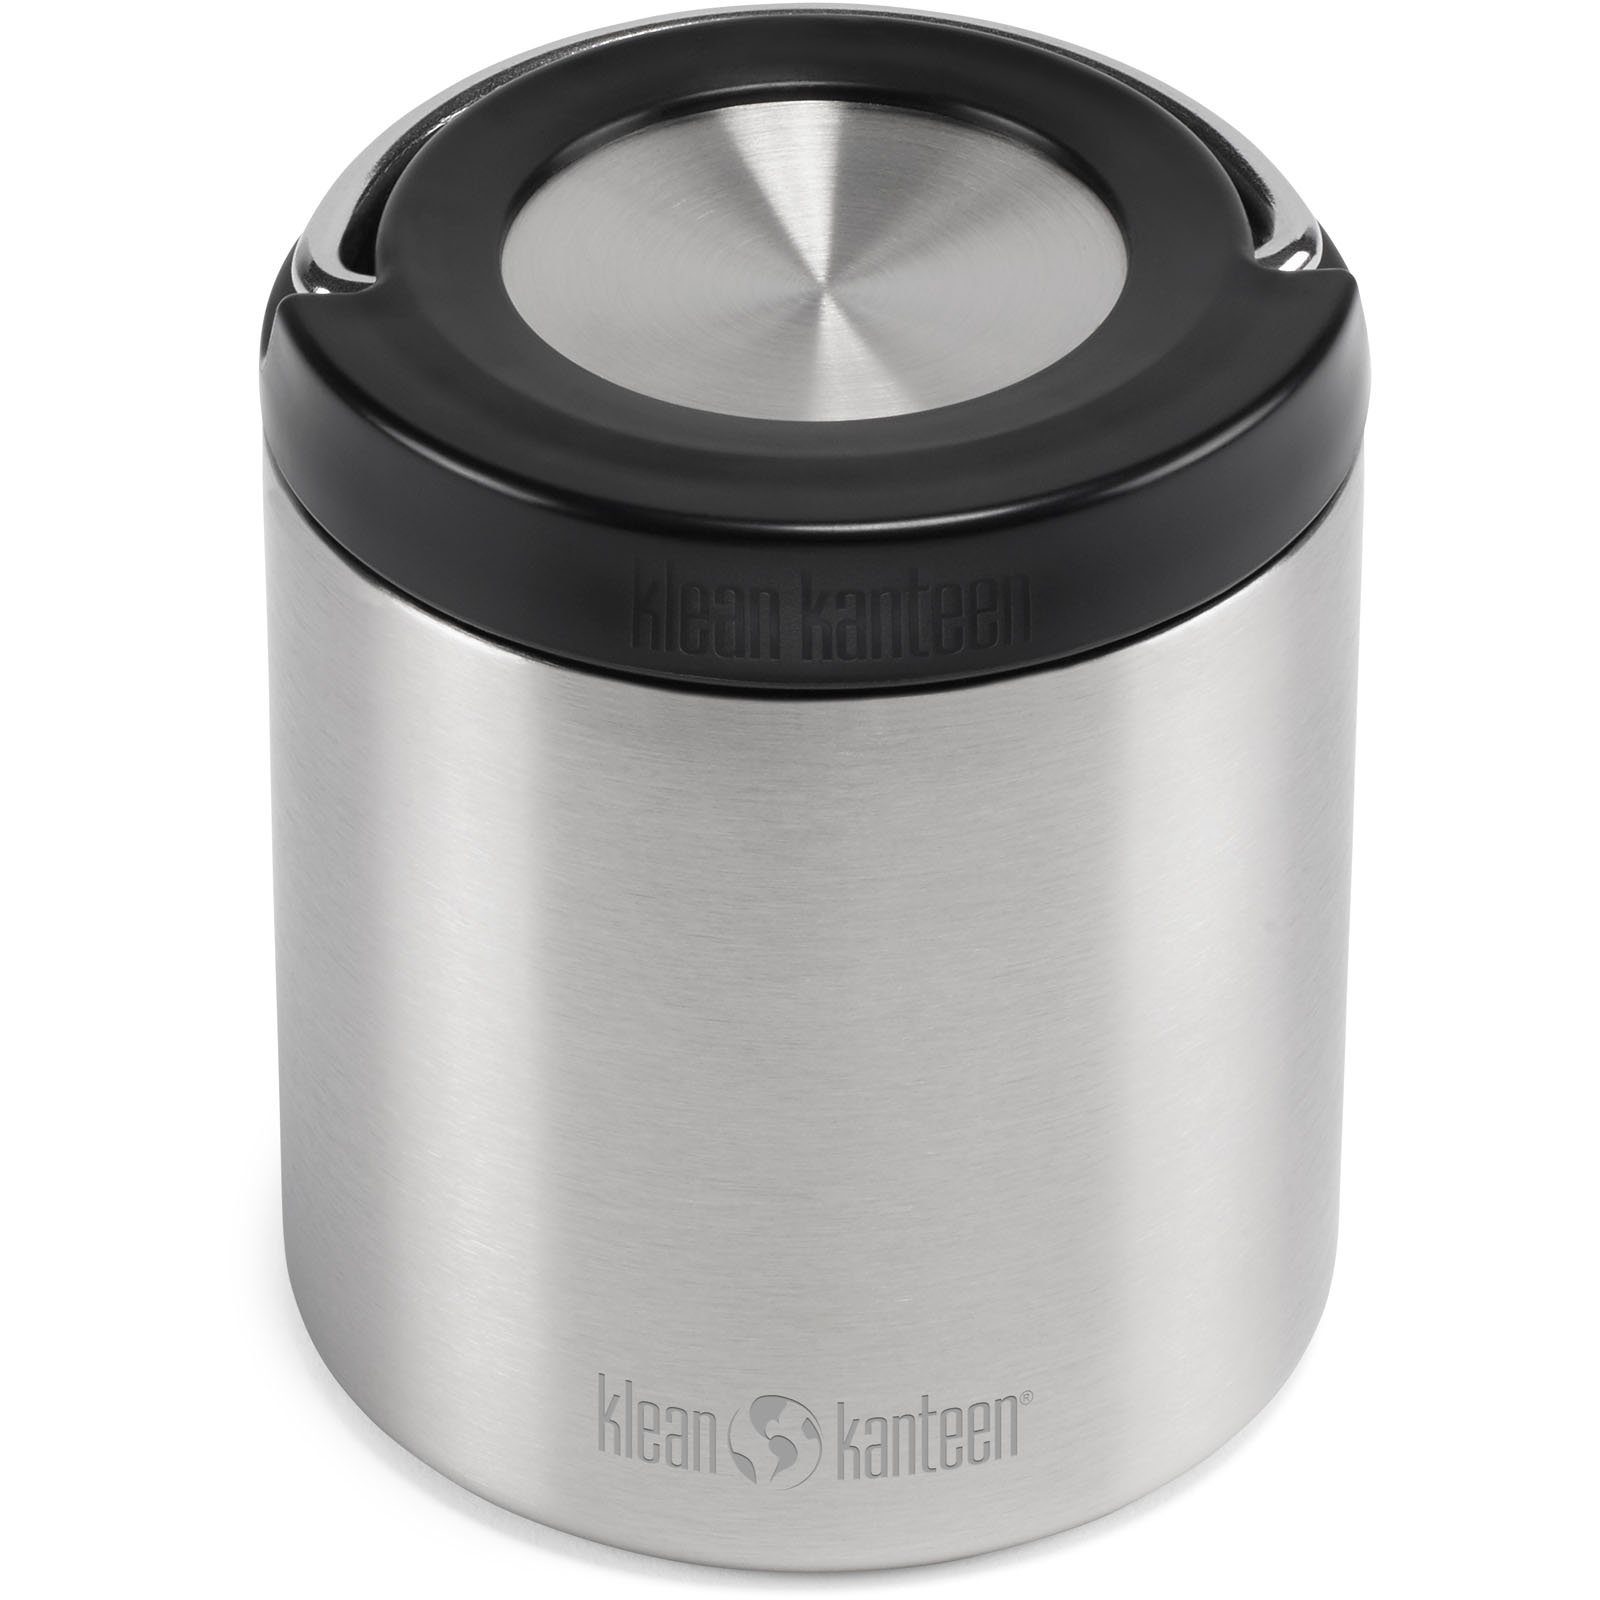 Klean Kanteen Thermobehälter Isolierbehälter TK Canister Thermo, Edelstahl, Polypropylen, Silikon, Essen Behälter Food Container